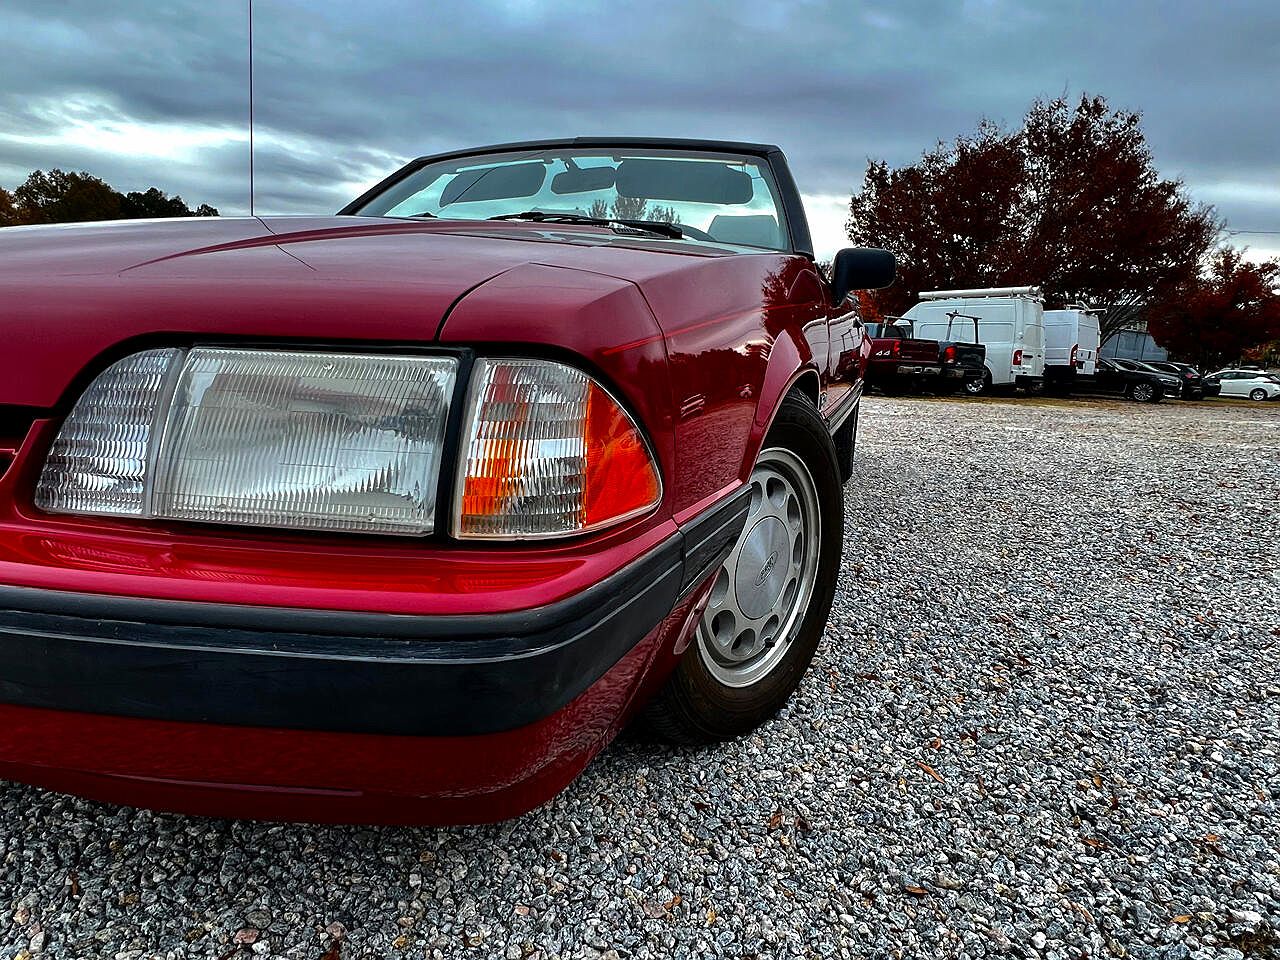 1988 Ford Mustang LX image 19